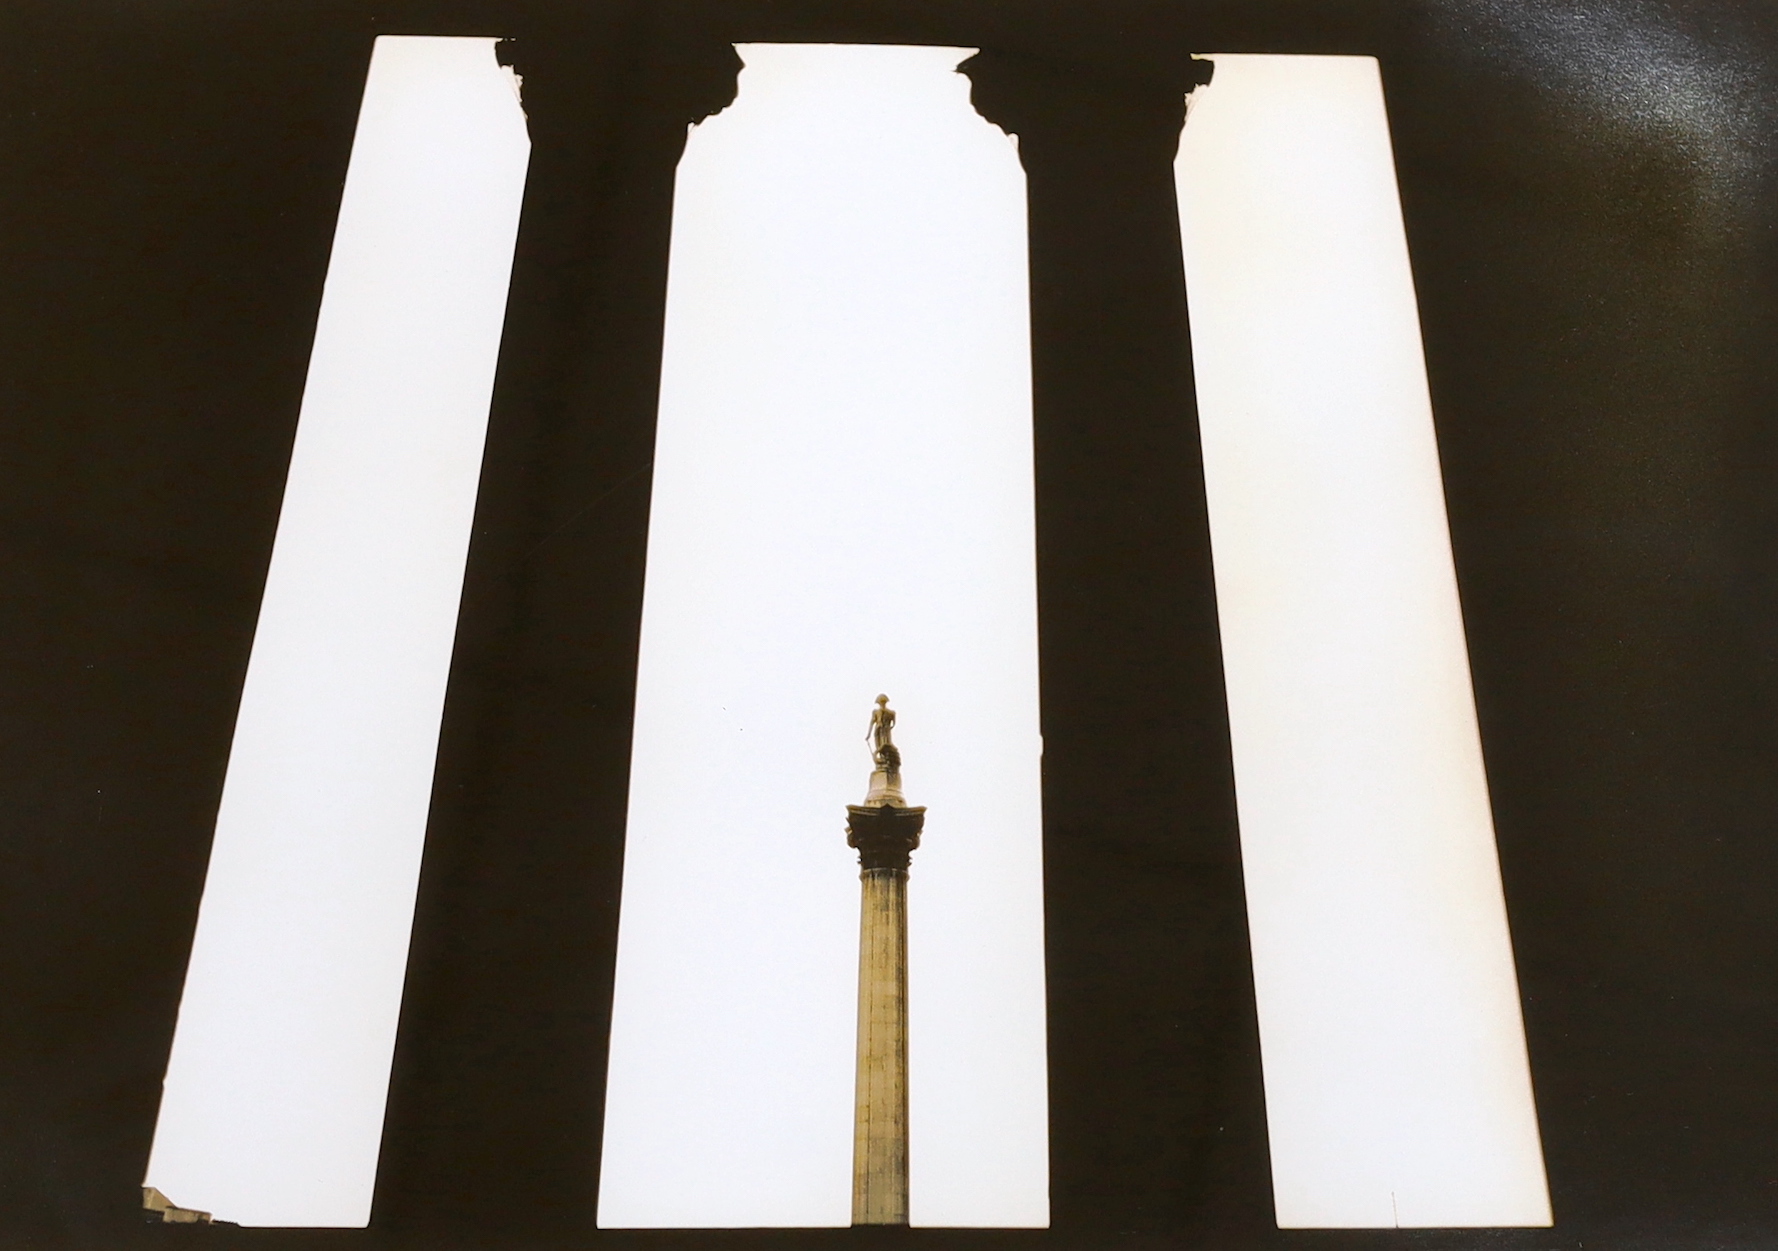 Marcus Davies (Contemporary), pair of gelatin prints, Canary Wharf, London 2001 and Nelson's Column, London, 2000, Davies and Tooth labels verso, 34 x 49cm